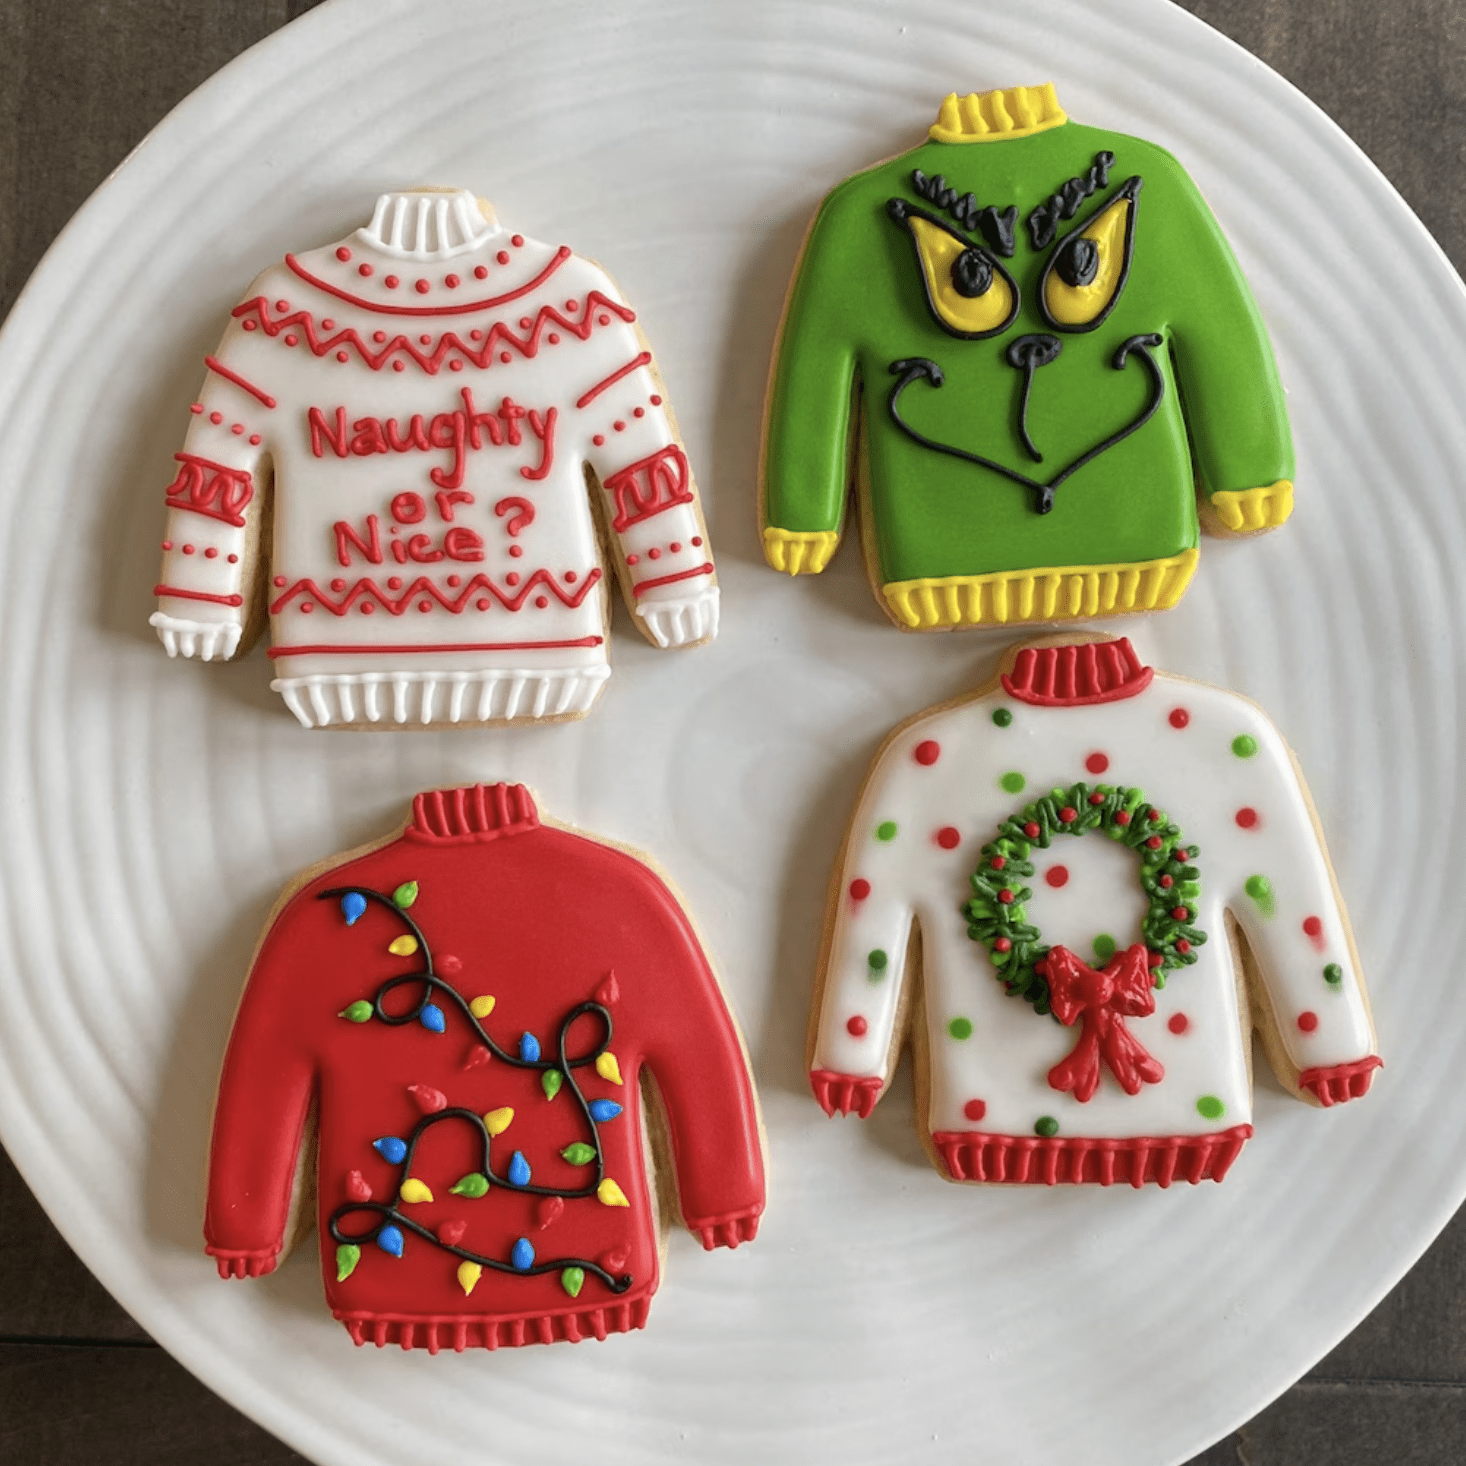 <p>Level up your decorating game with this <a href="https://www.etsy.com/listing/1130255289/ugly-christmas-sweater-cookie-cutter" rel="nofollow noopener noreferrer">ugly sweater cookie cutter</a>. The opportunities are endless when you add colorful frosting, sprinkles and creativity. What ugly sweater will you design first?</p> <p class="listicle-page__cta-button-shop"><a class="shop-btn" href="https://www.etsy.com/listing/1130255289/ugly-christmas-sweater-cookie-cutter">Shop Now</a></p>